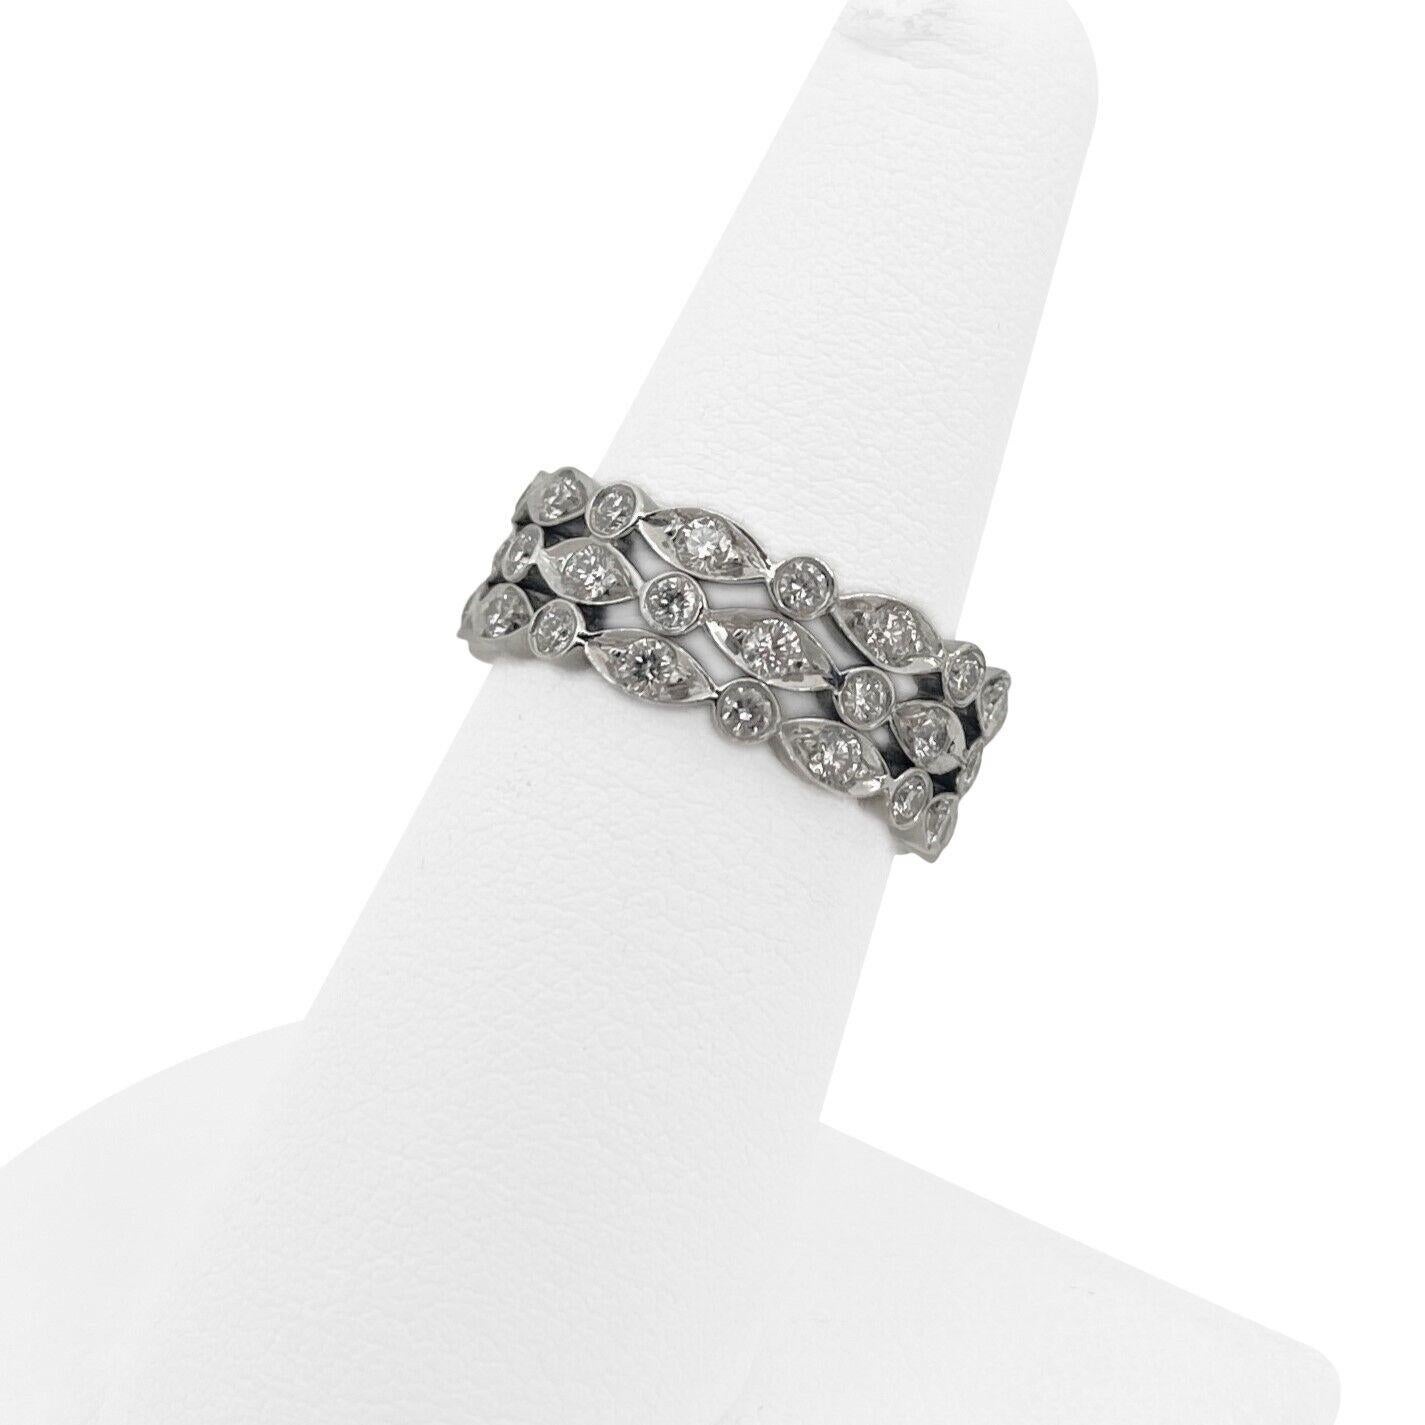 Tiffany & Co. Platinum and 1.6ctw Diamond Jazz Band Ring Size 6.25

Condition:  Excellent Condition, Professionally Cleaned and Polished
Metal:  Platinum 950 (Marked, and Professionally Tested)
Weight:  8.1g
Diamonds:  48 Round Brilliant Diamonds